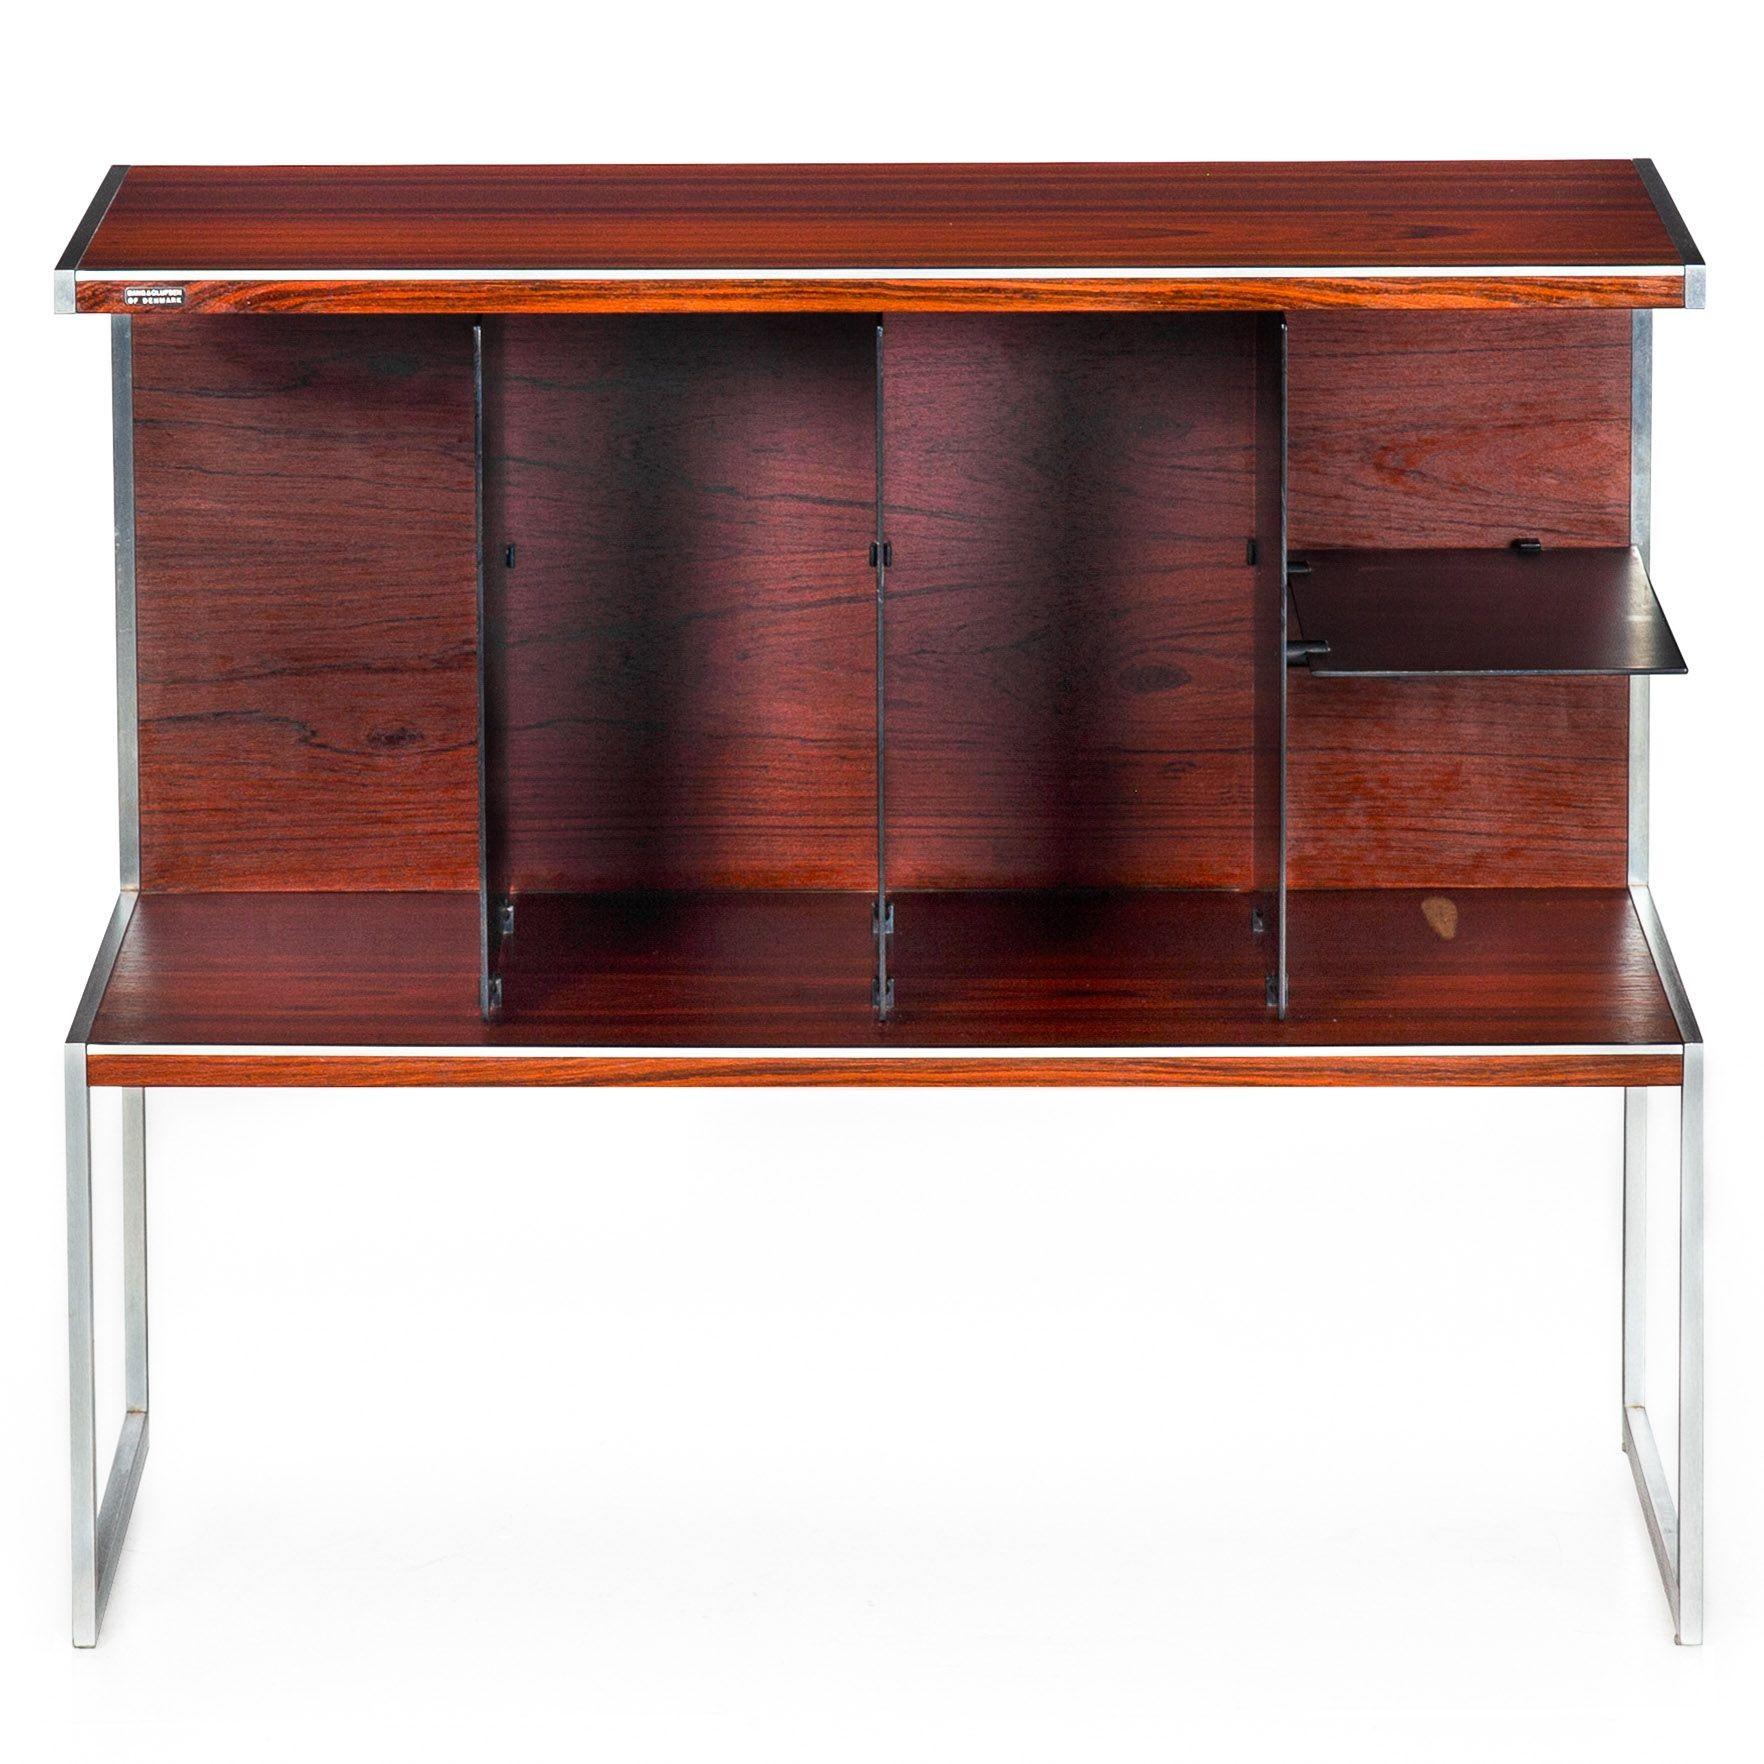 BRAZILIAN ROSEWOOD AND BRUSHED-STEEL MEDIA SHELF CONSOLE
Jacob Jensen for Bang & Olufsen  Denmark  retains original label  circa 1980s
Item # 311LEJ02P

This unique media console, both chic and practical, stands out as a rare vintage treasure.